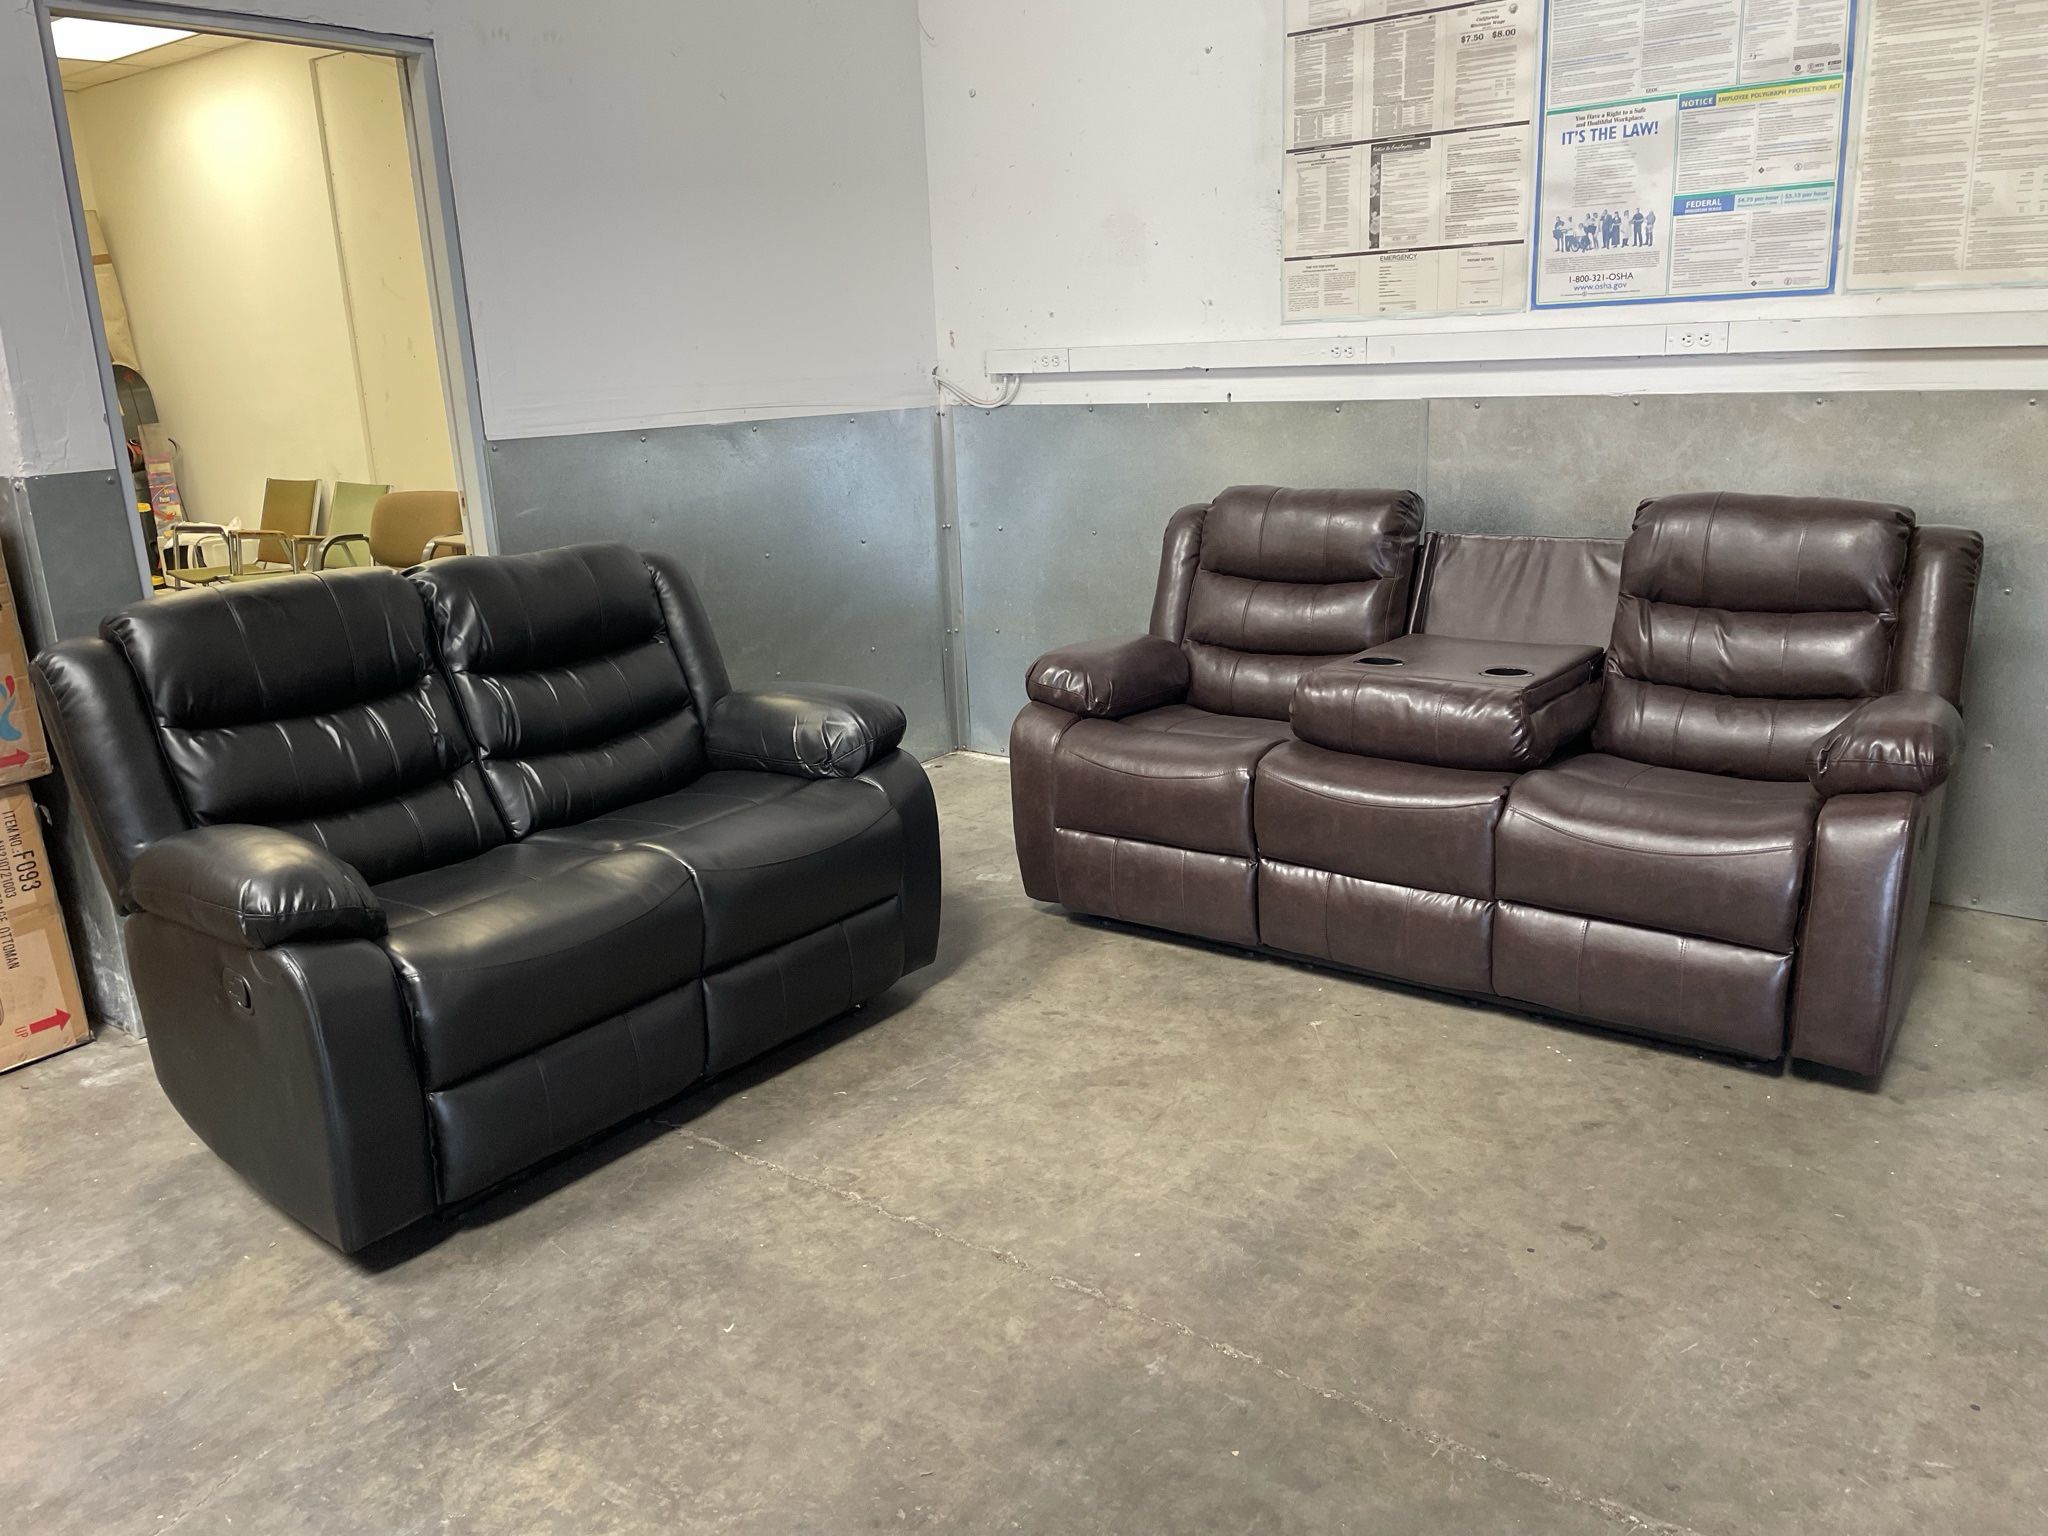 Sofa Loveseat Chair. Cup Holder. Recliners. Black. Leather 